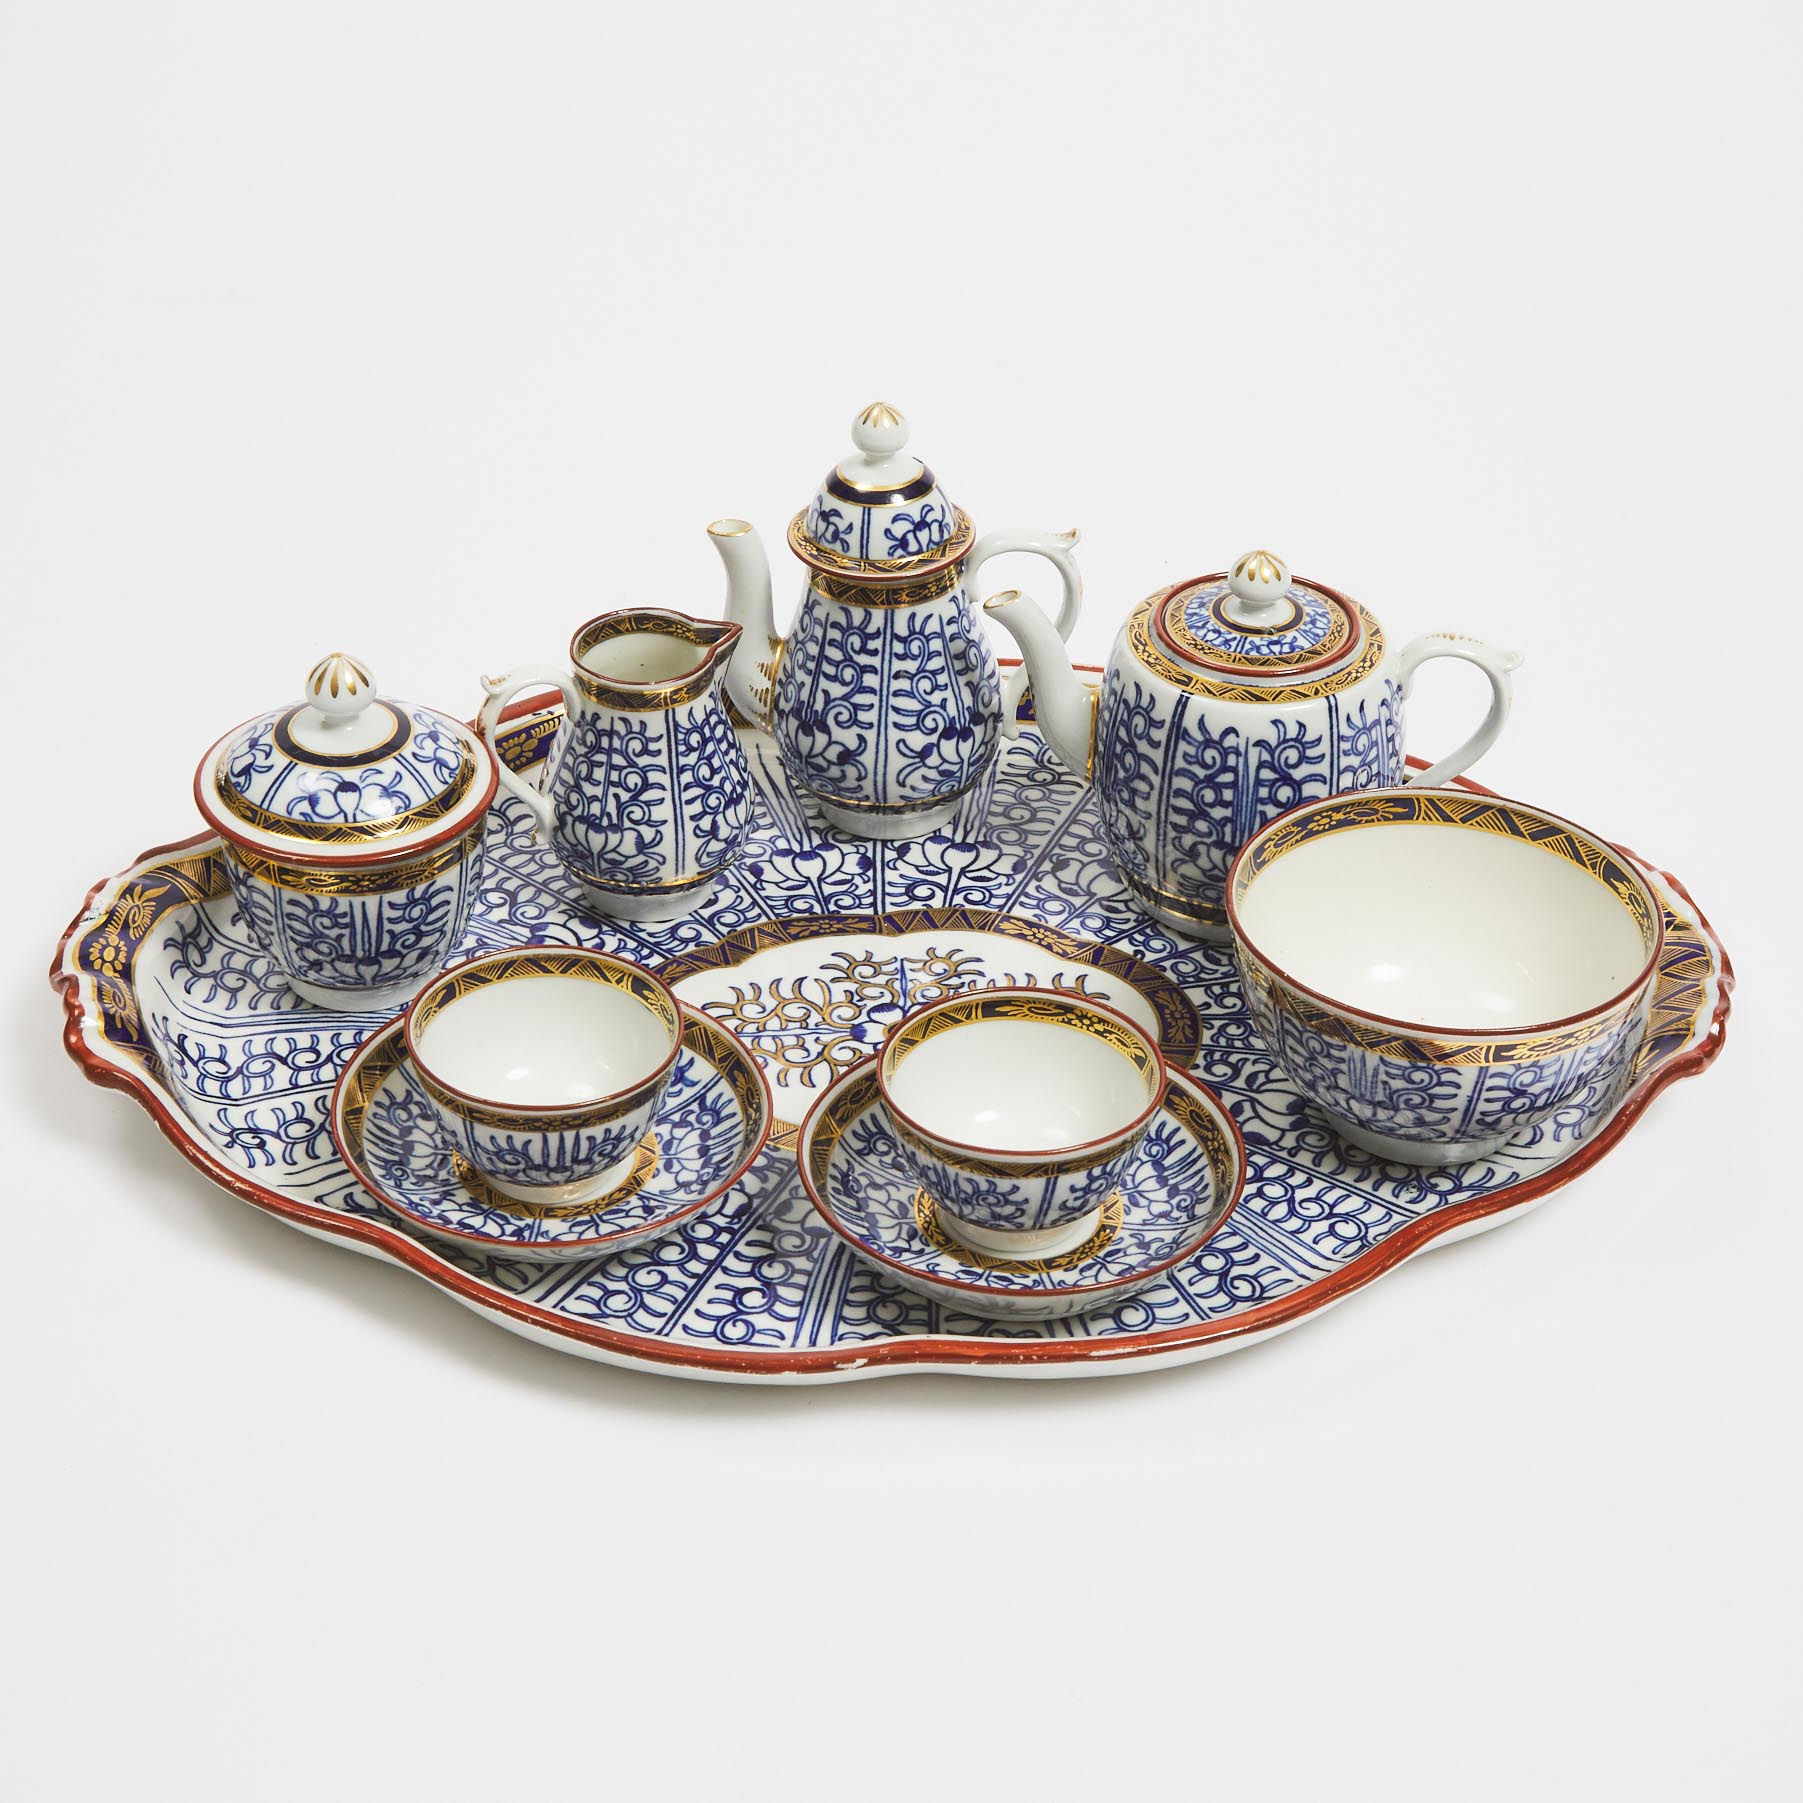 Worcester 'Royal Lily' Pattern Toy Tea and Coffee Service, c.1780-1800